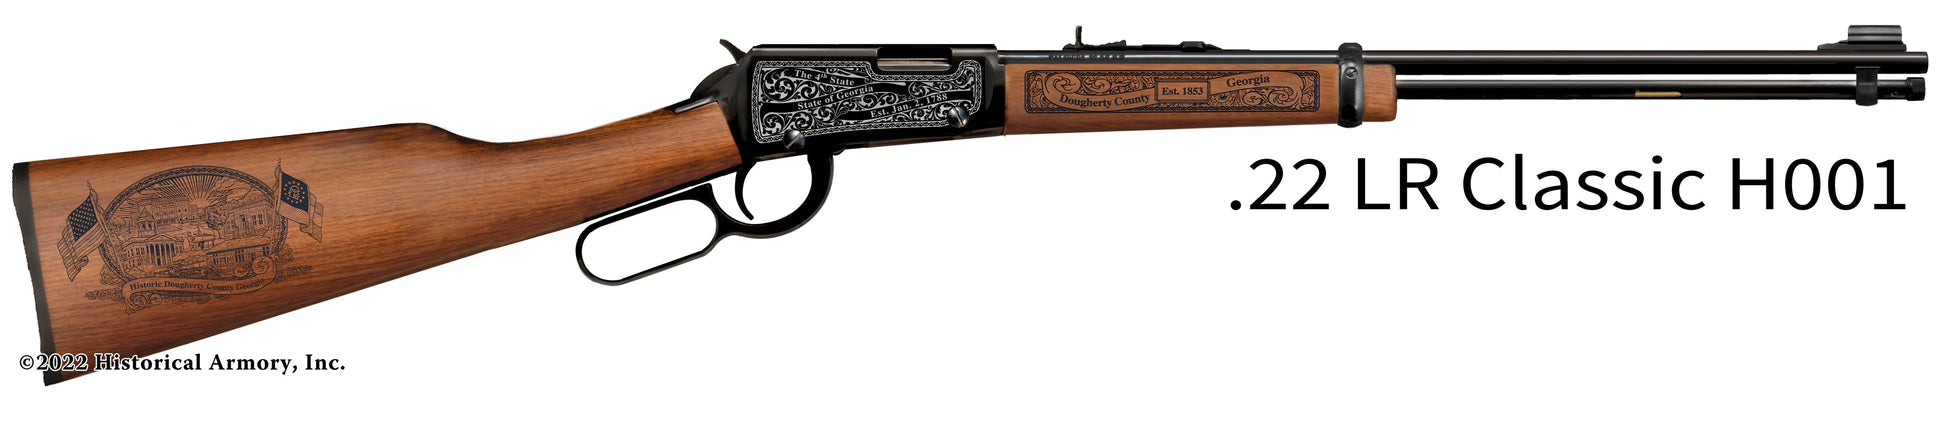 Dougherty County Georgia Engraved Henry H001 Rifle